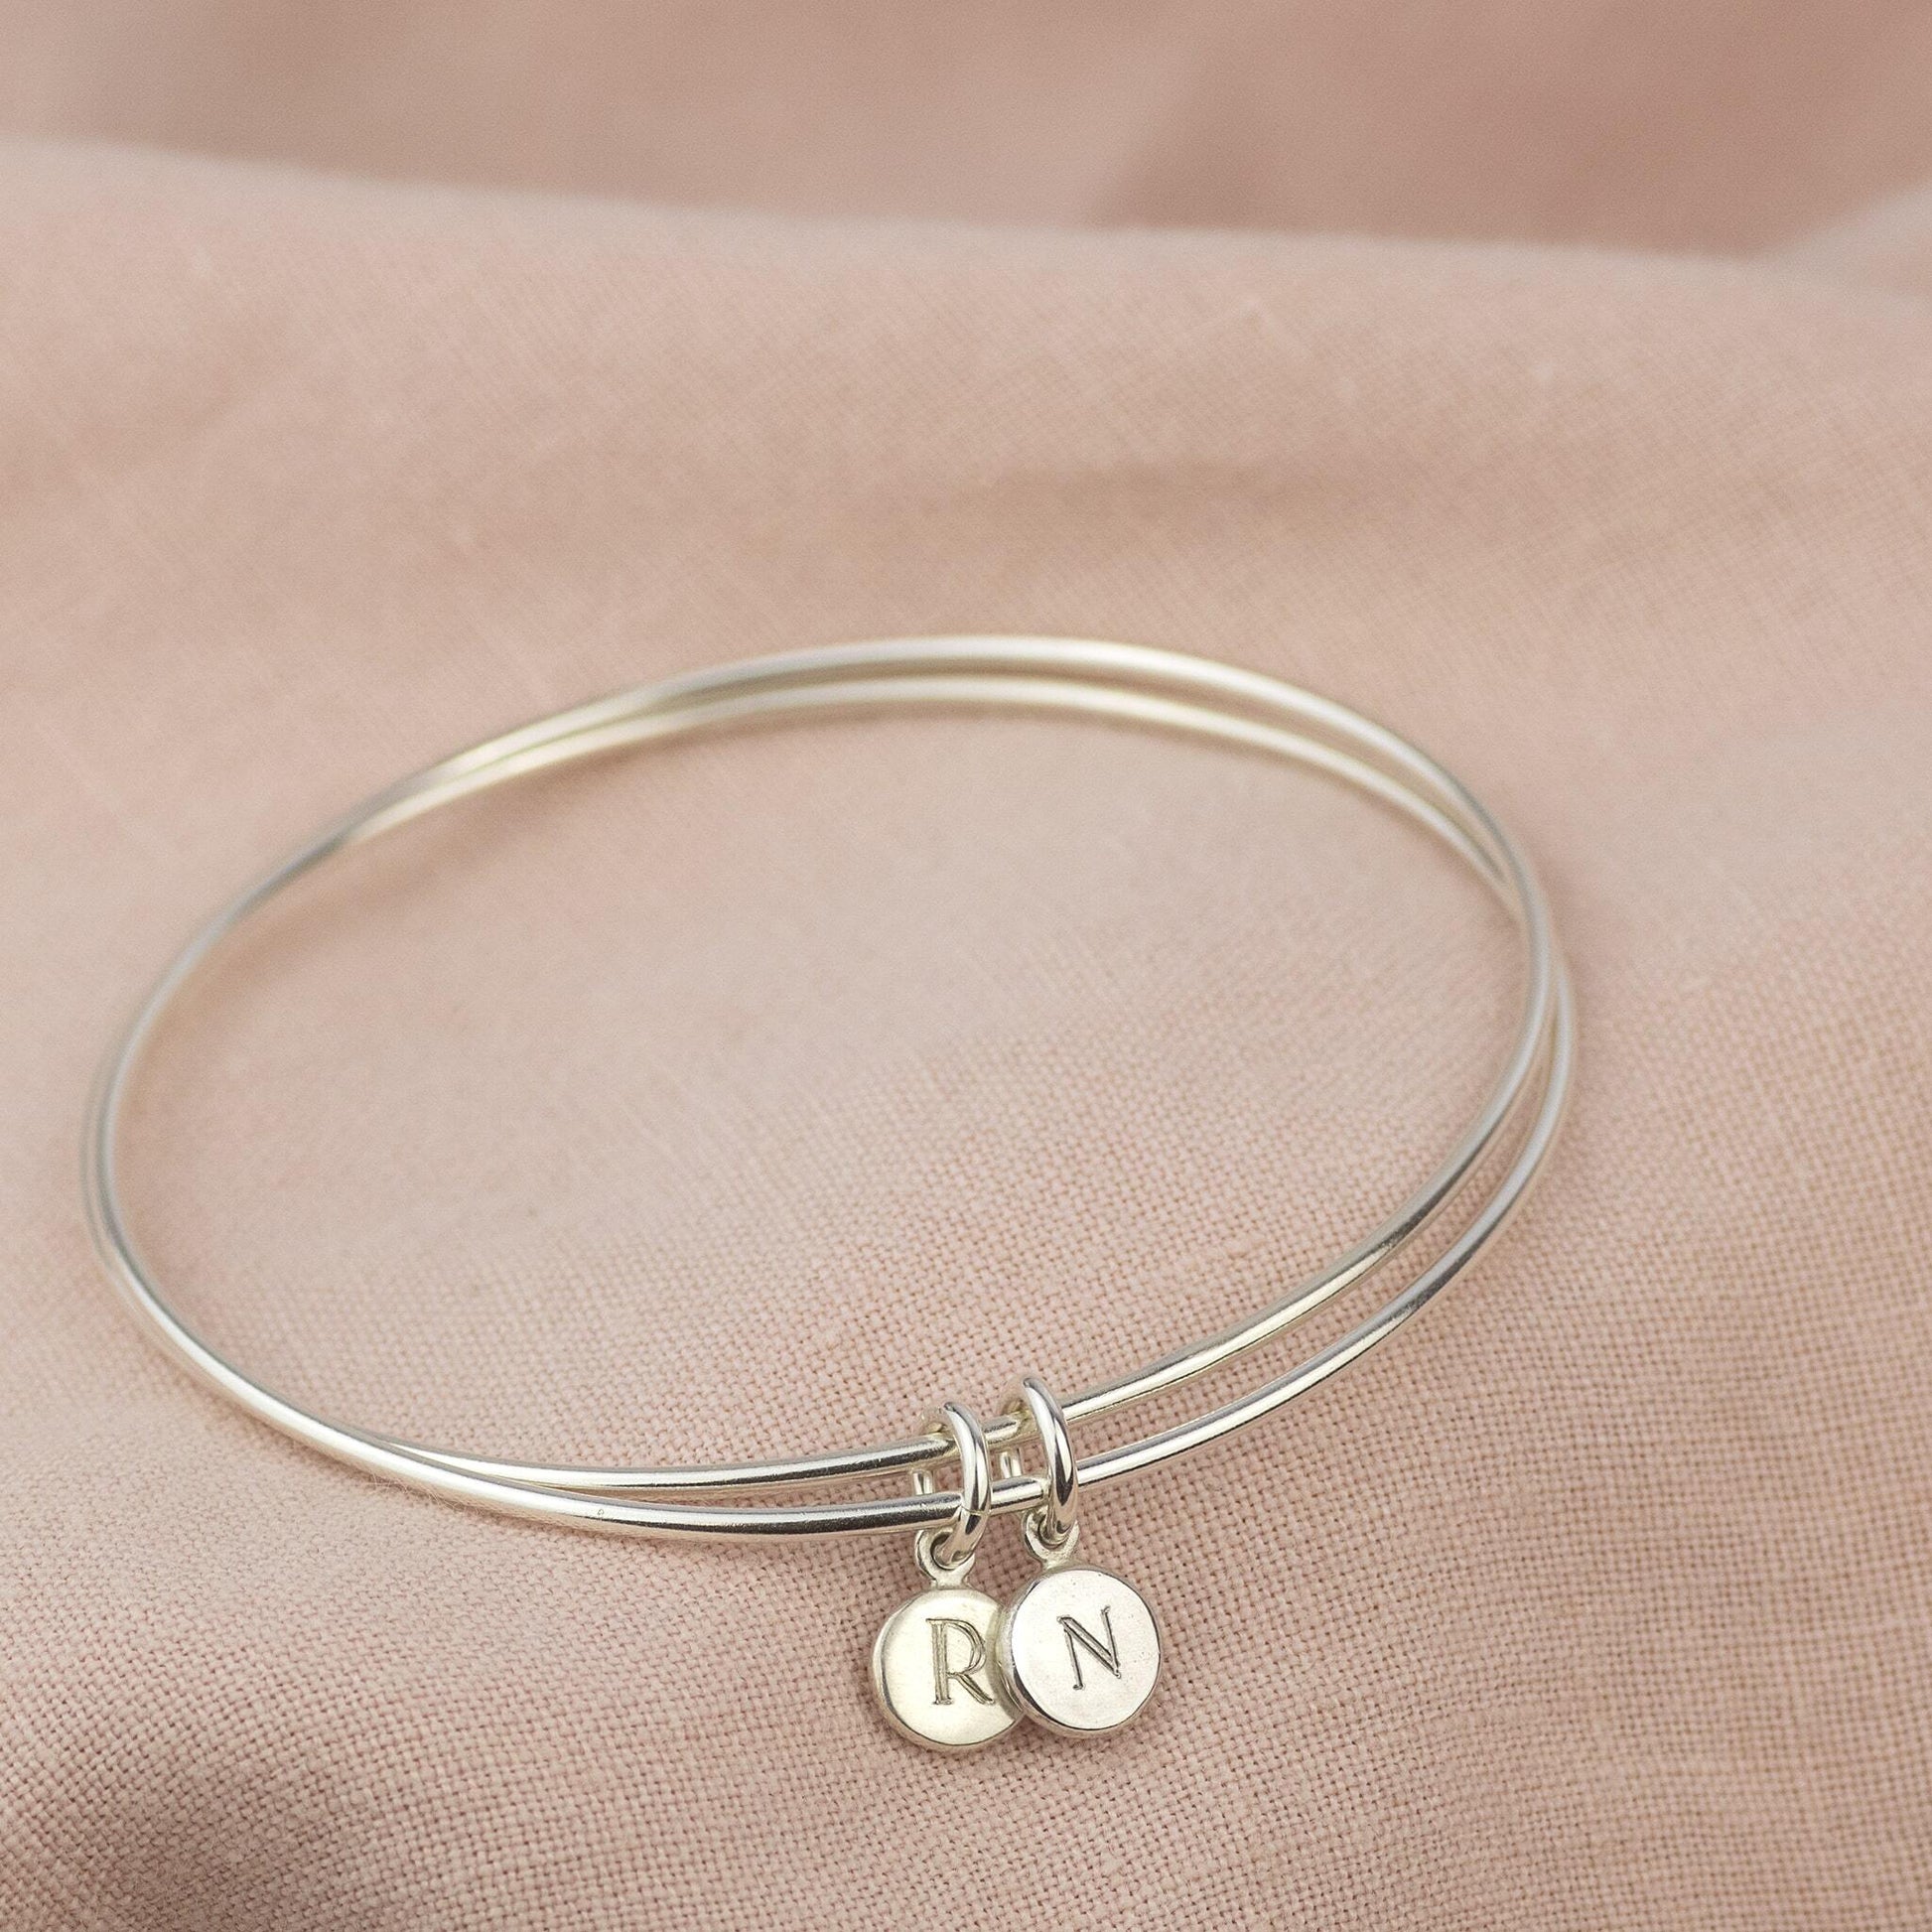 Personalised Friendship Bracelet - Double Linked Bangle - Linked for a Lifetime